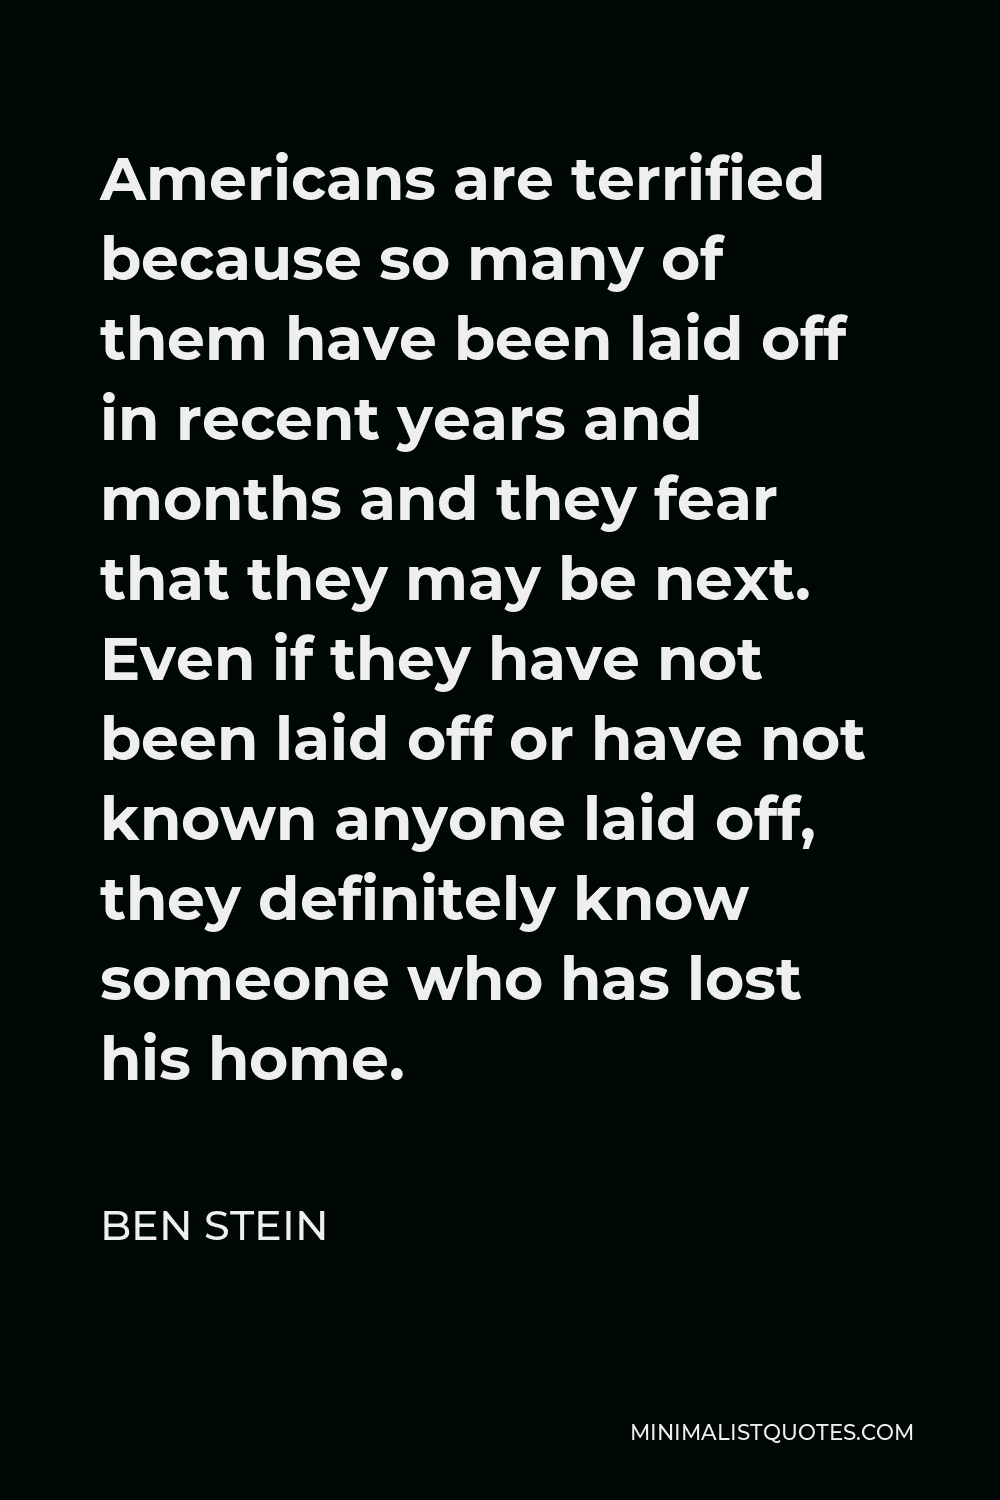 Ben Stein Quote - Americans are terrified because so many of them have been laid off in recent years and months and they fear that they may be next. Even if they have not been laid off or have not known anyone laid off, they definitely know someone who has lost his home.